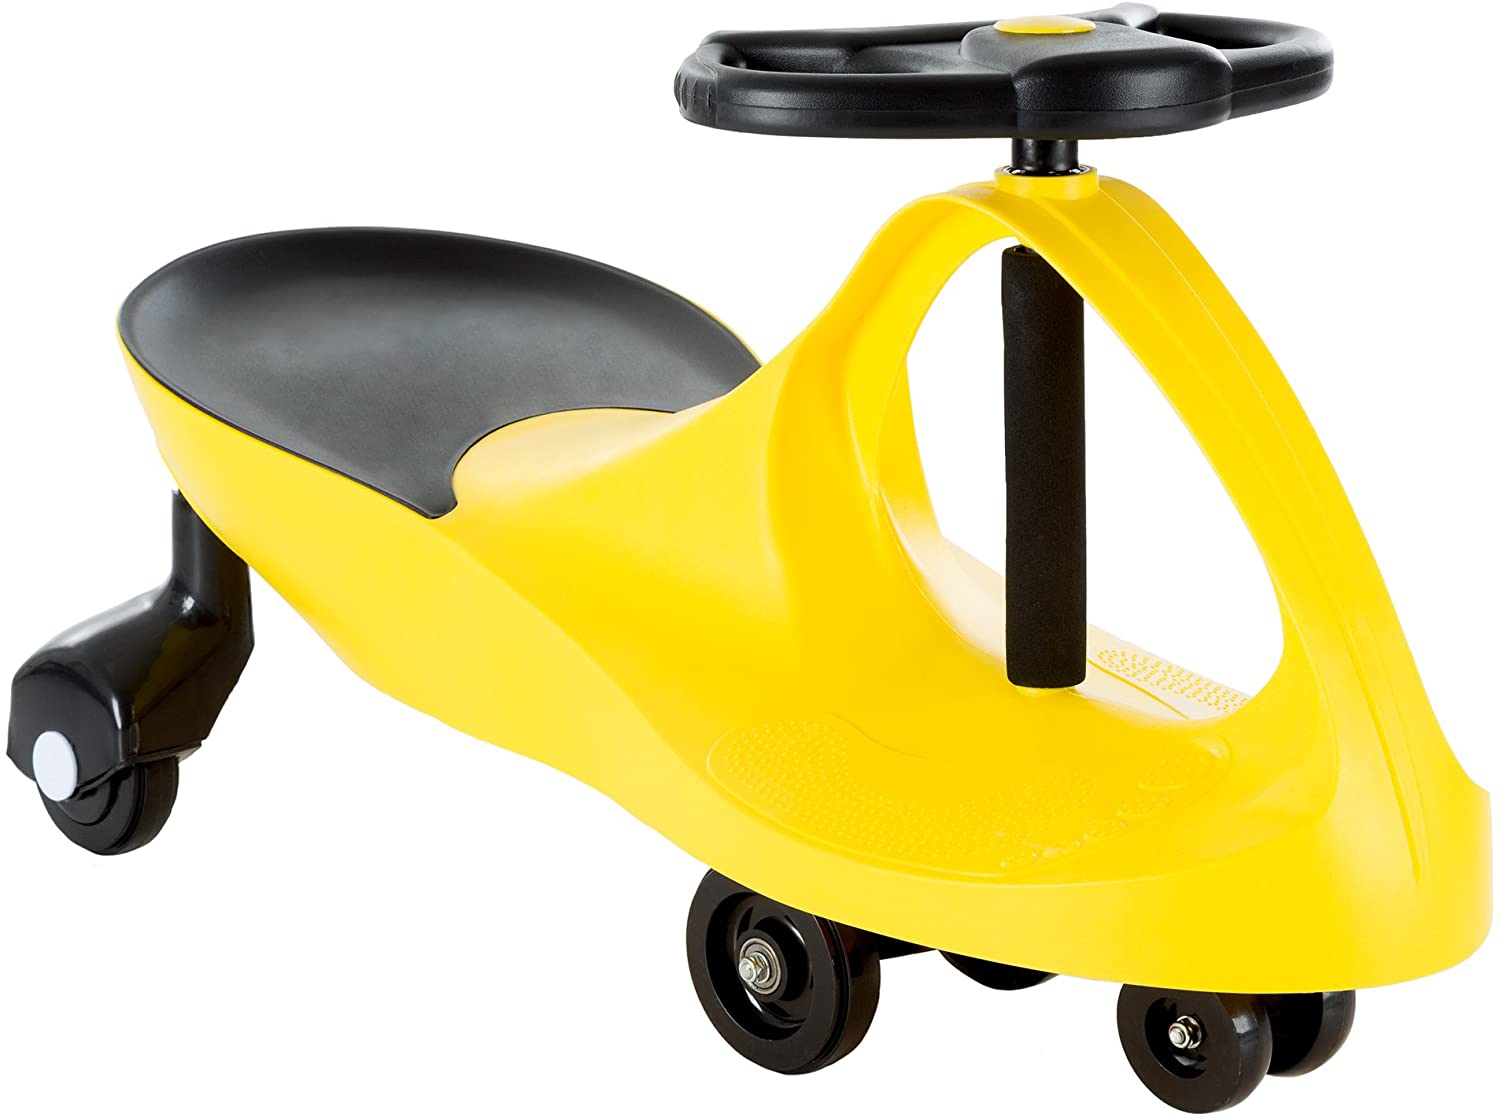 Photo 1 of Wiggle Car Ride On Toy  No Batteries Gears or Pedals  Twist Swivel Go  Outdoor Ride Ons for Kids 3 Years and Up by Lil Rider Yellow